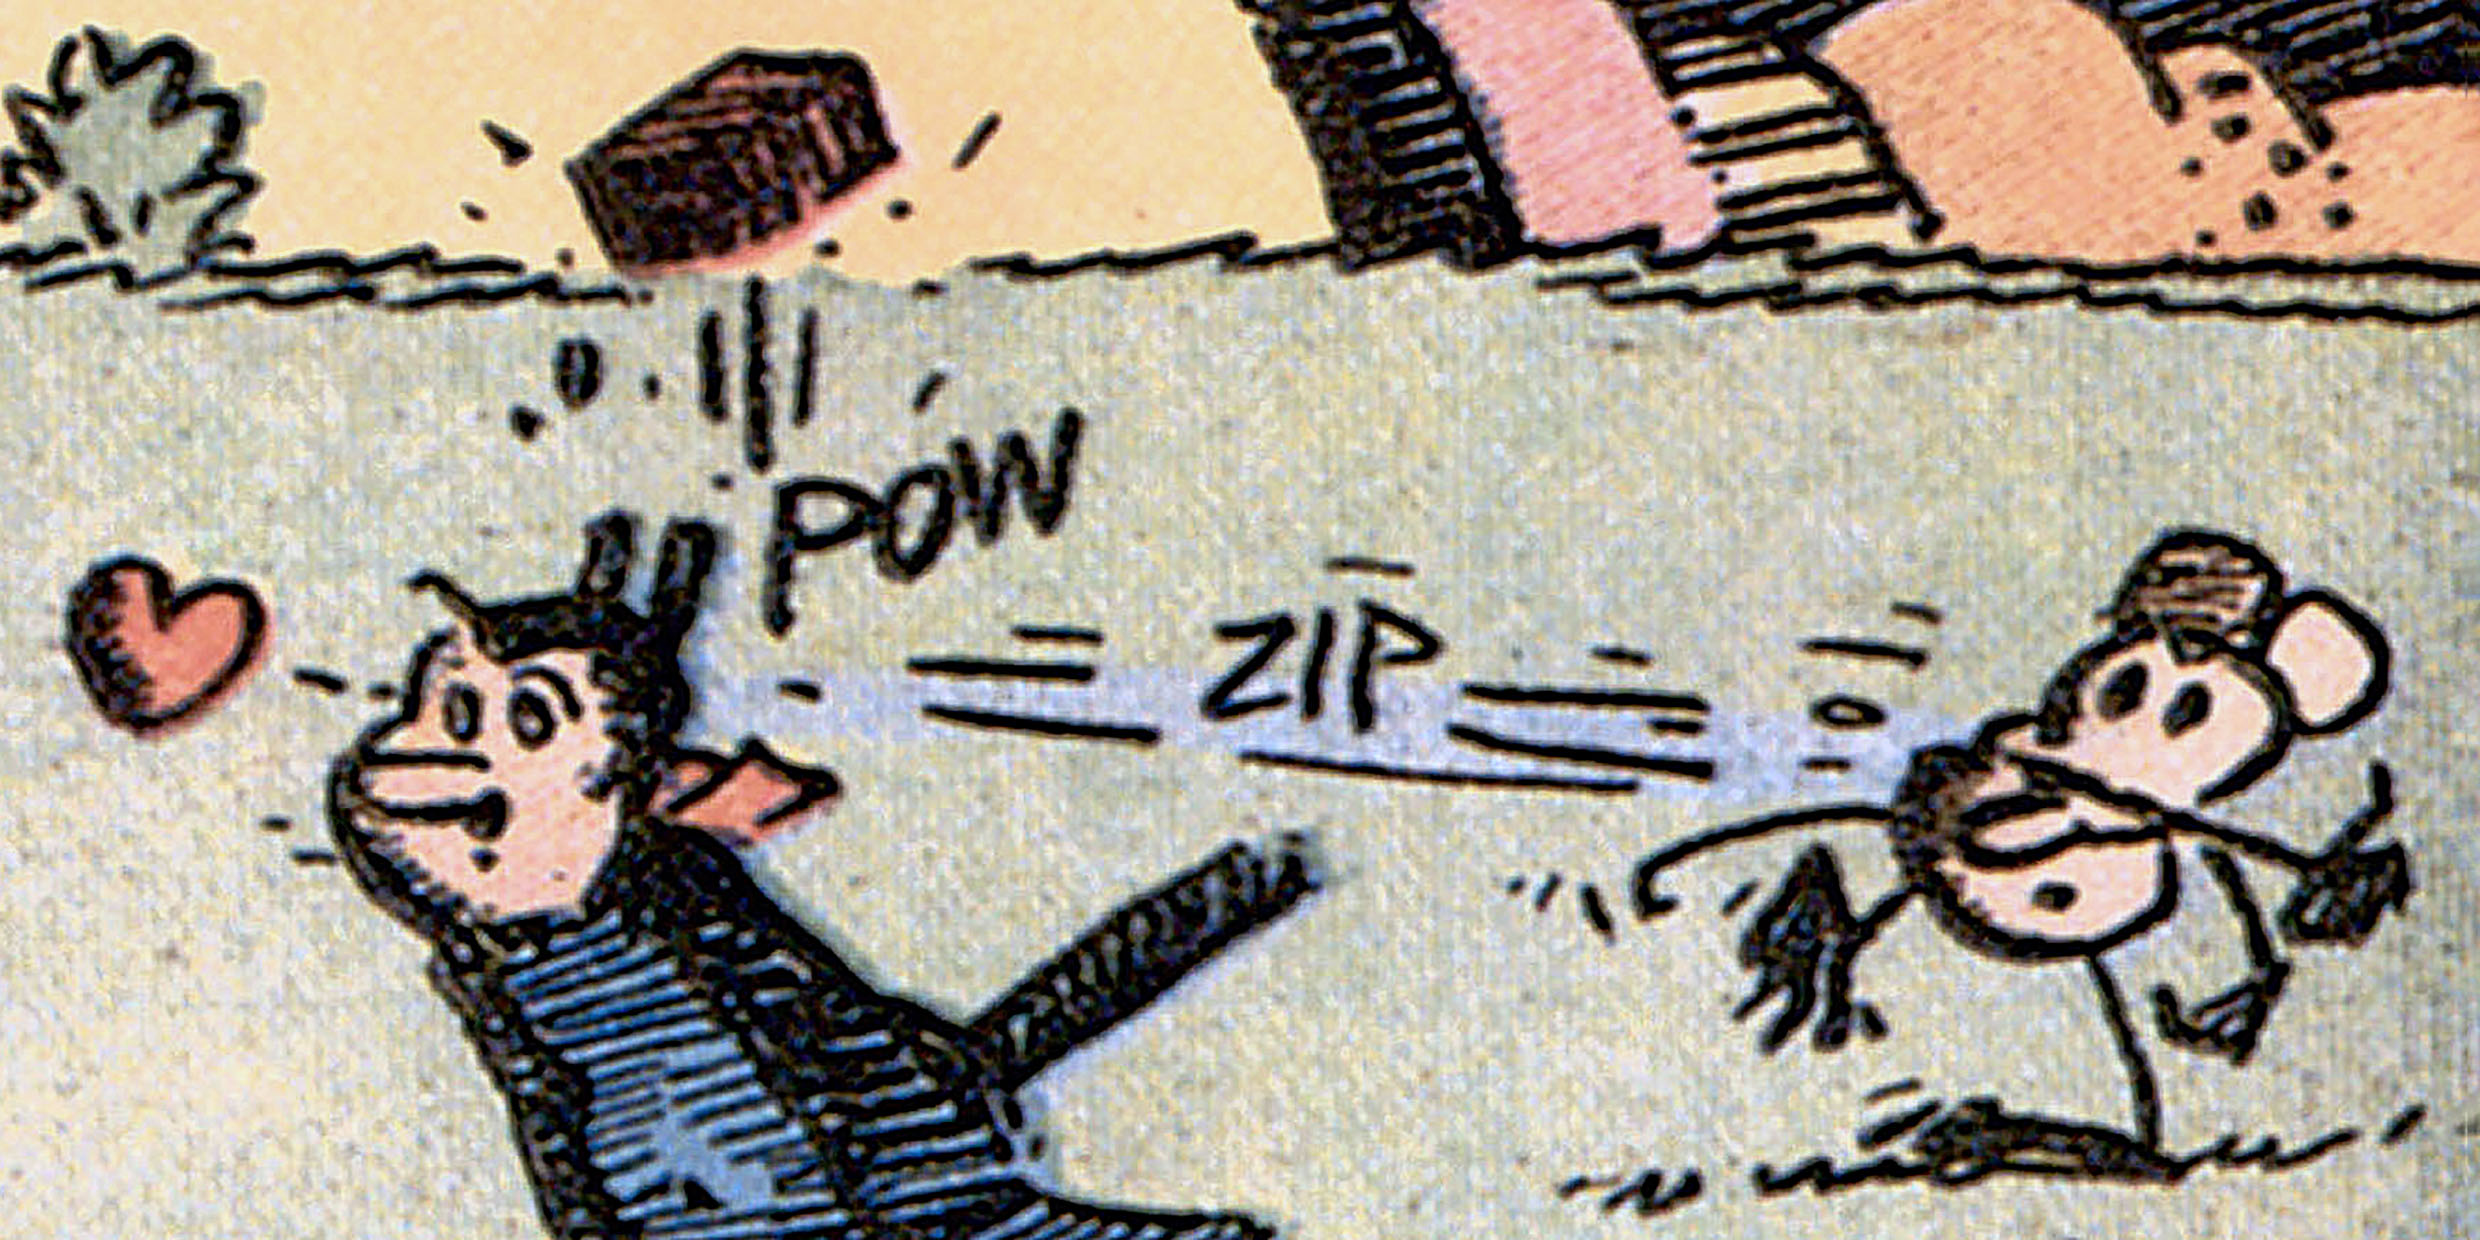 Detail from comic strip image depicting Ignatz Mouse throwing a brick at Krazy Kat